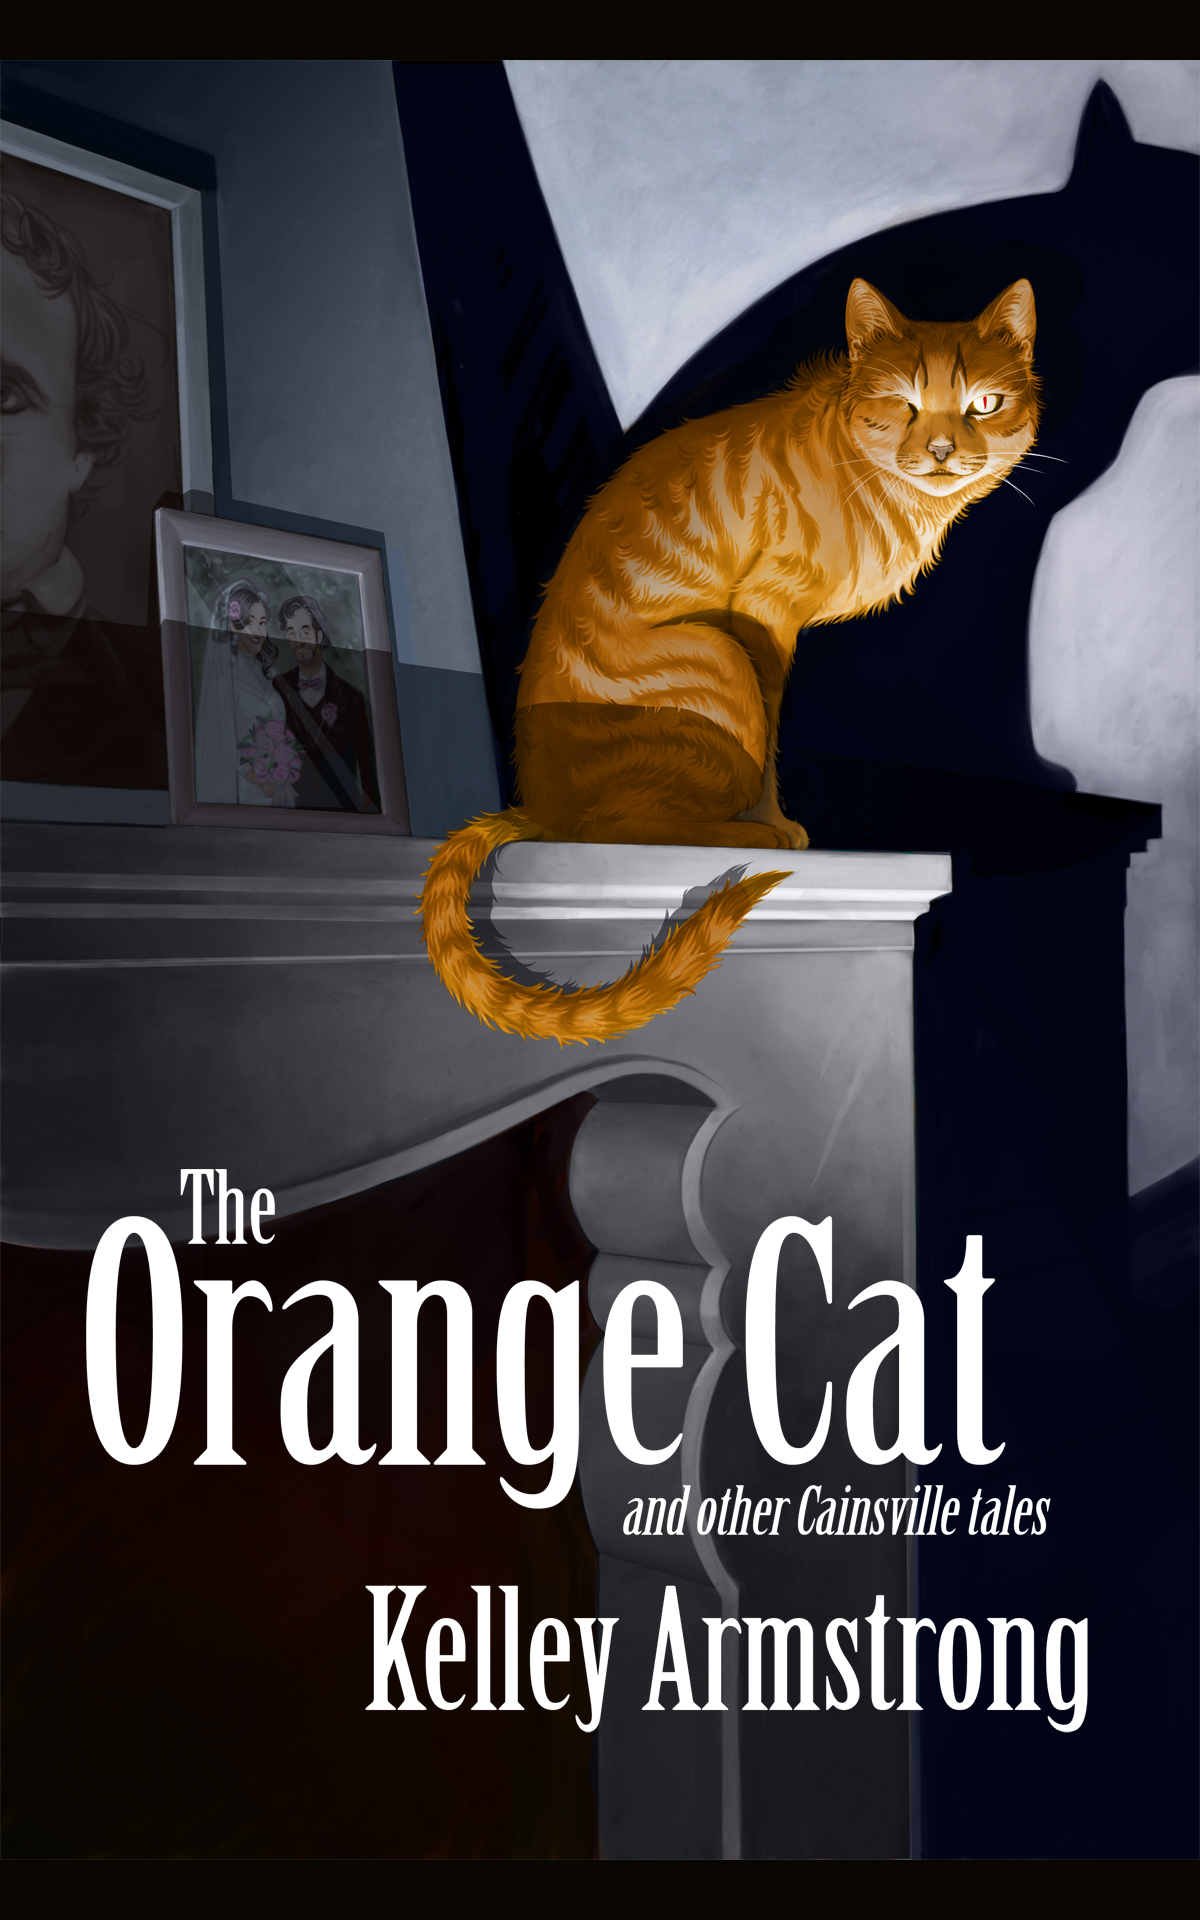 The Orange Cat & other Cainsville tales (2016)